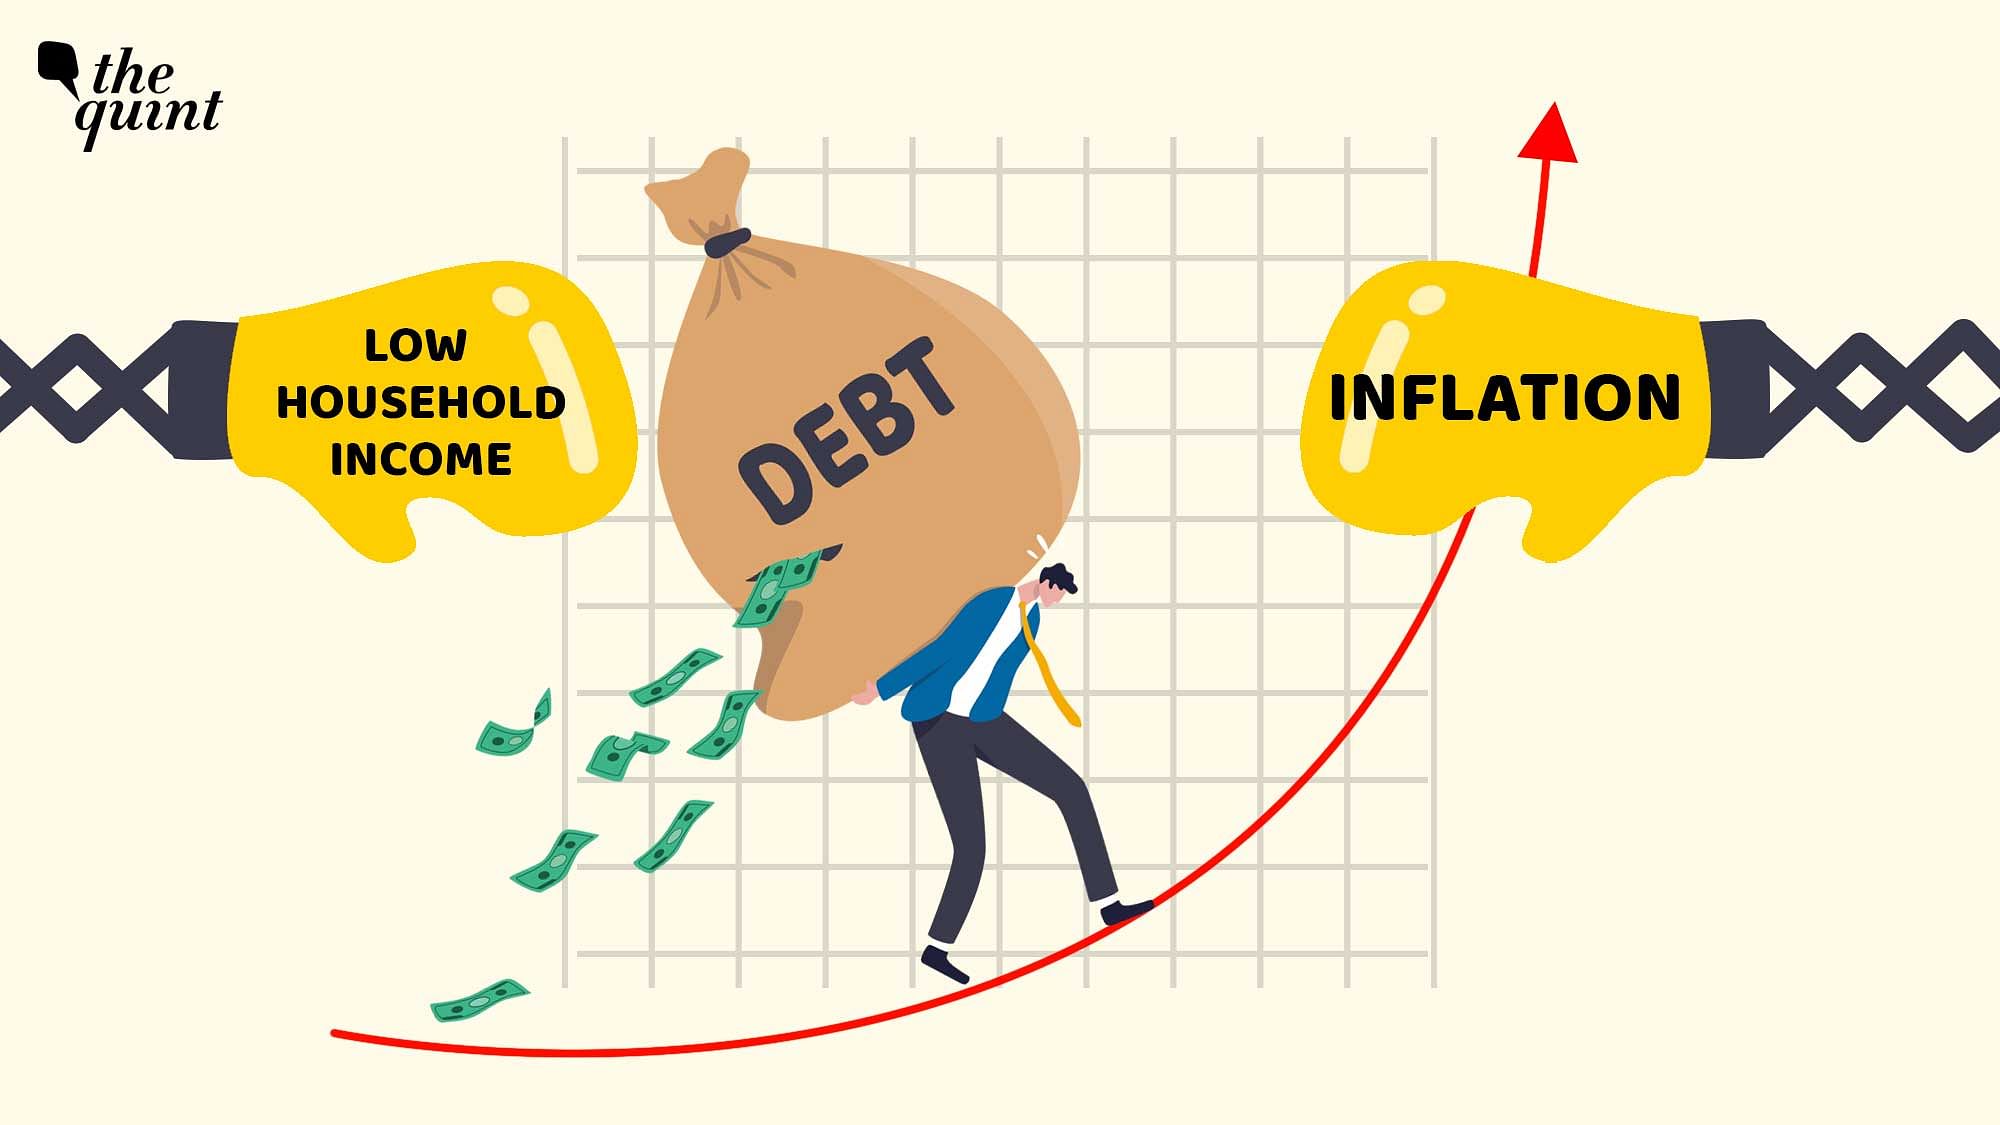 'Alarm Bells Ringing': High Debt Pinches Poor Amid Inflation, Slow Income Growth